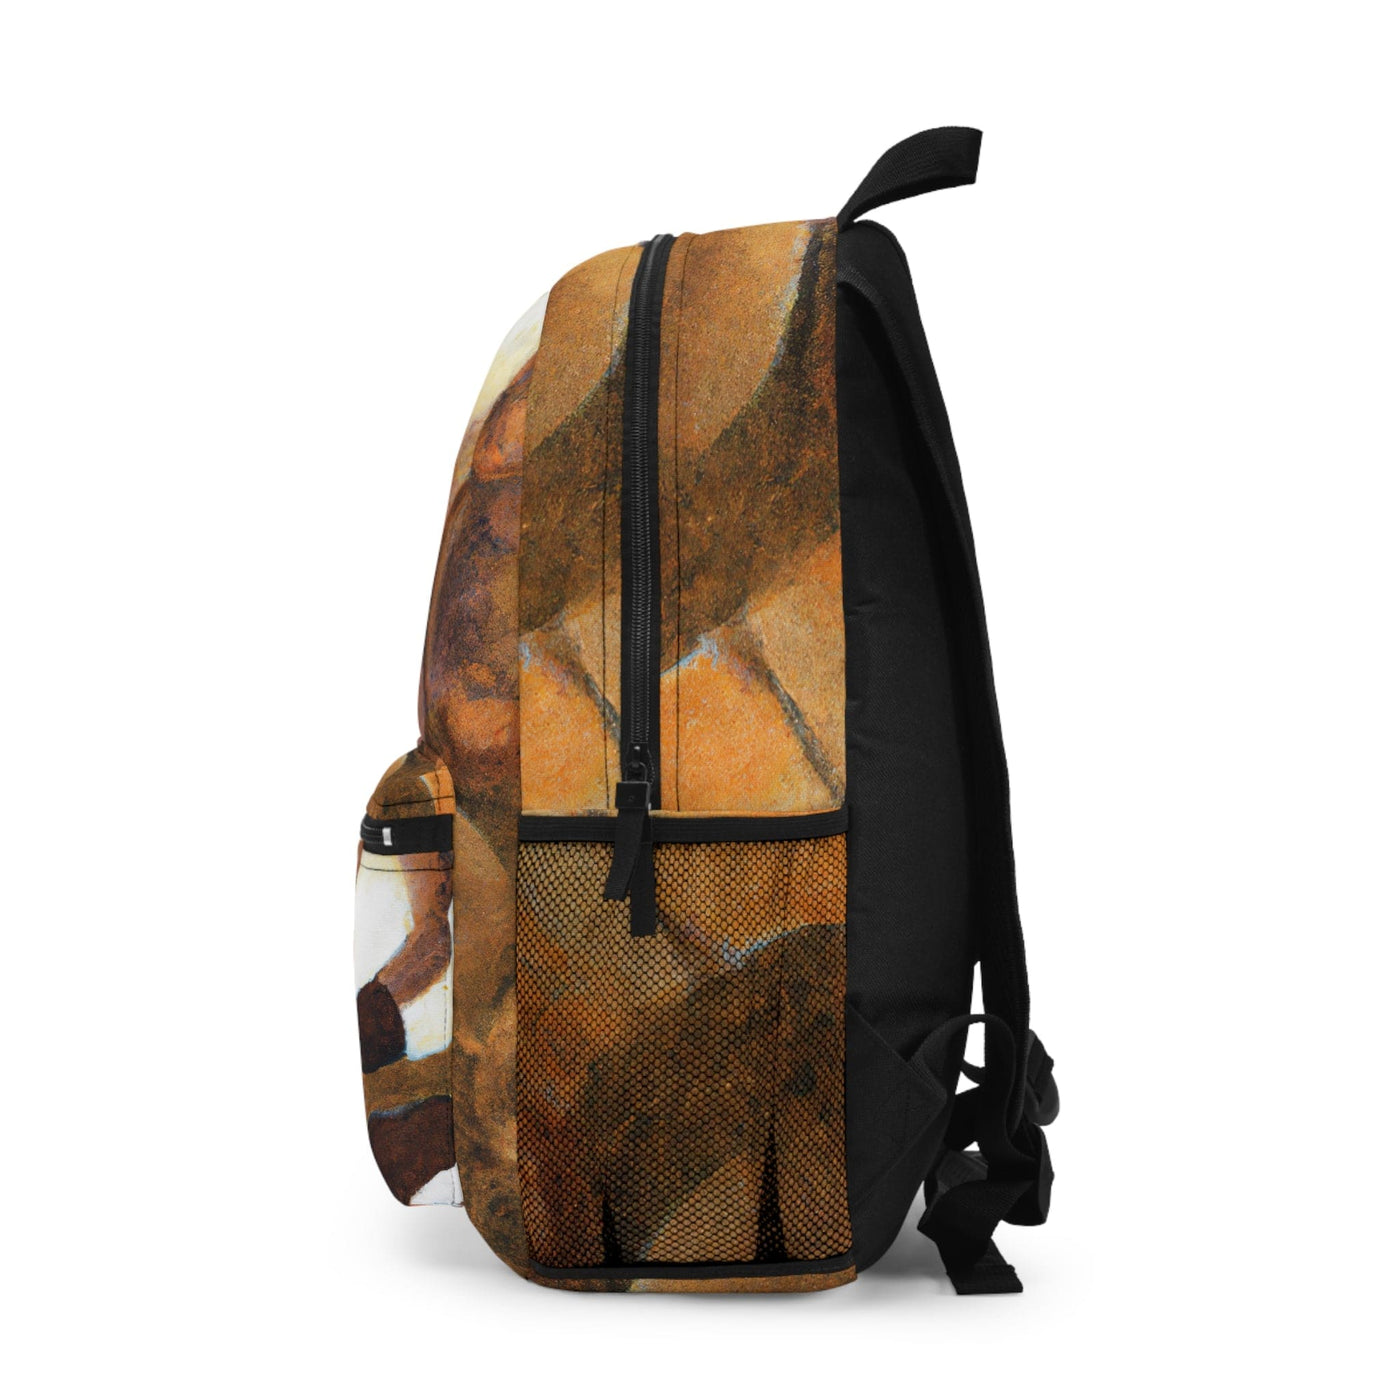 Backpack - Large Water - resistant Bag Brown White Stone Pattern - Bags